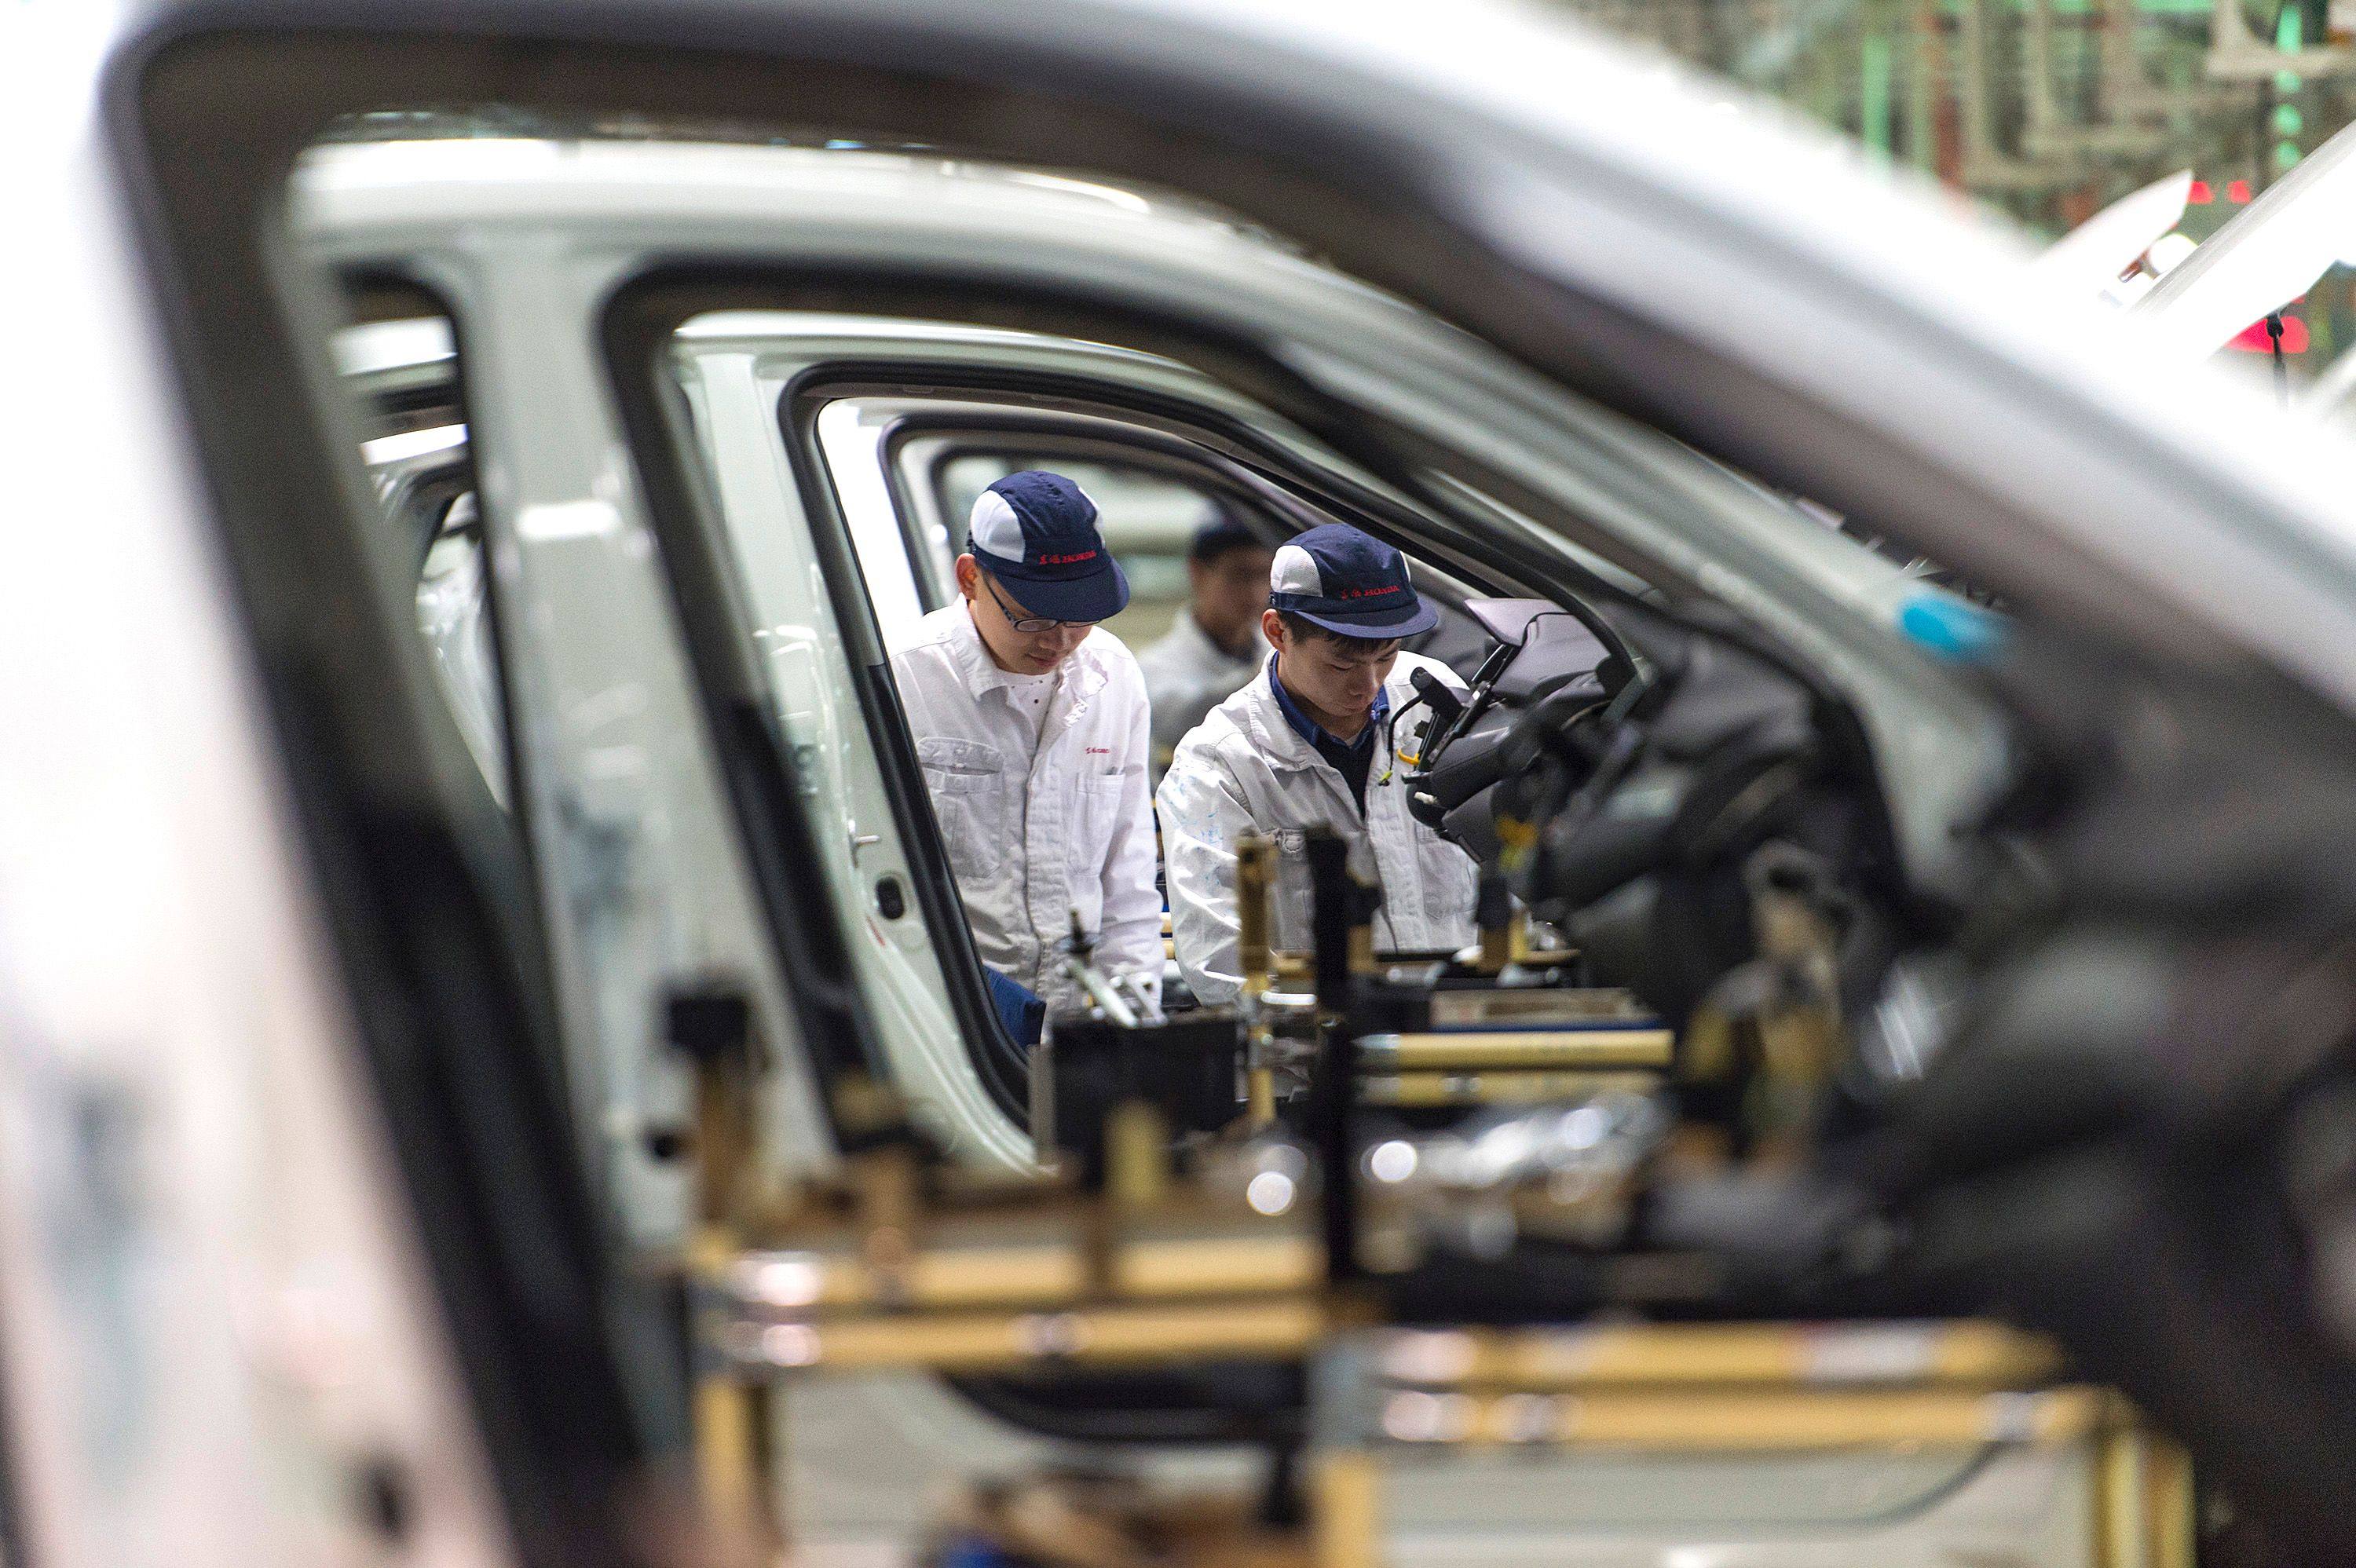 Employees work on the Honda Civic production line at a factory in Wuhan that the Japanese carmaker operates as a joint venture with Dongfeng Motor Group. Photo: AFP